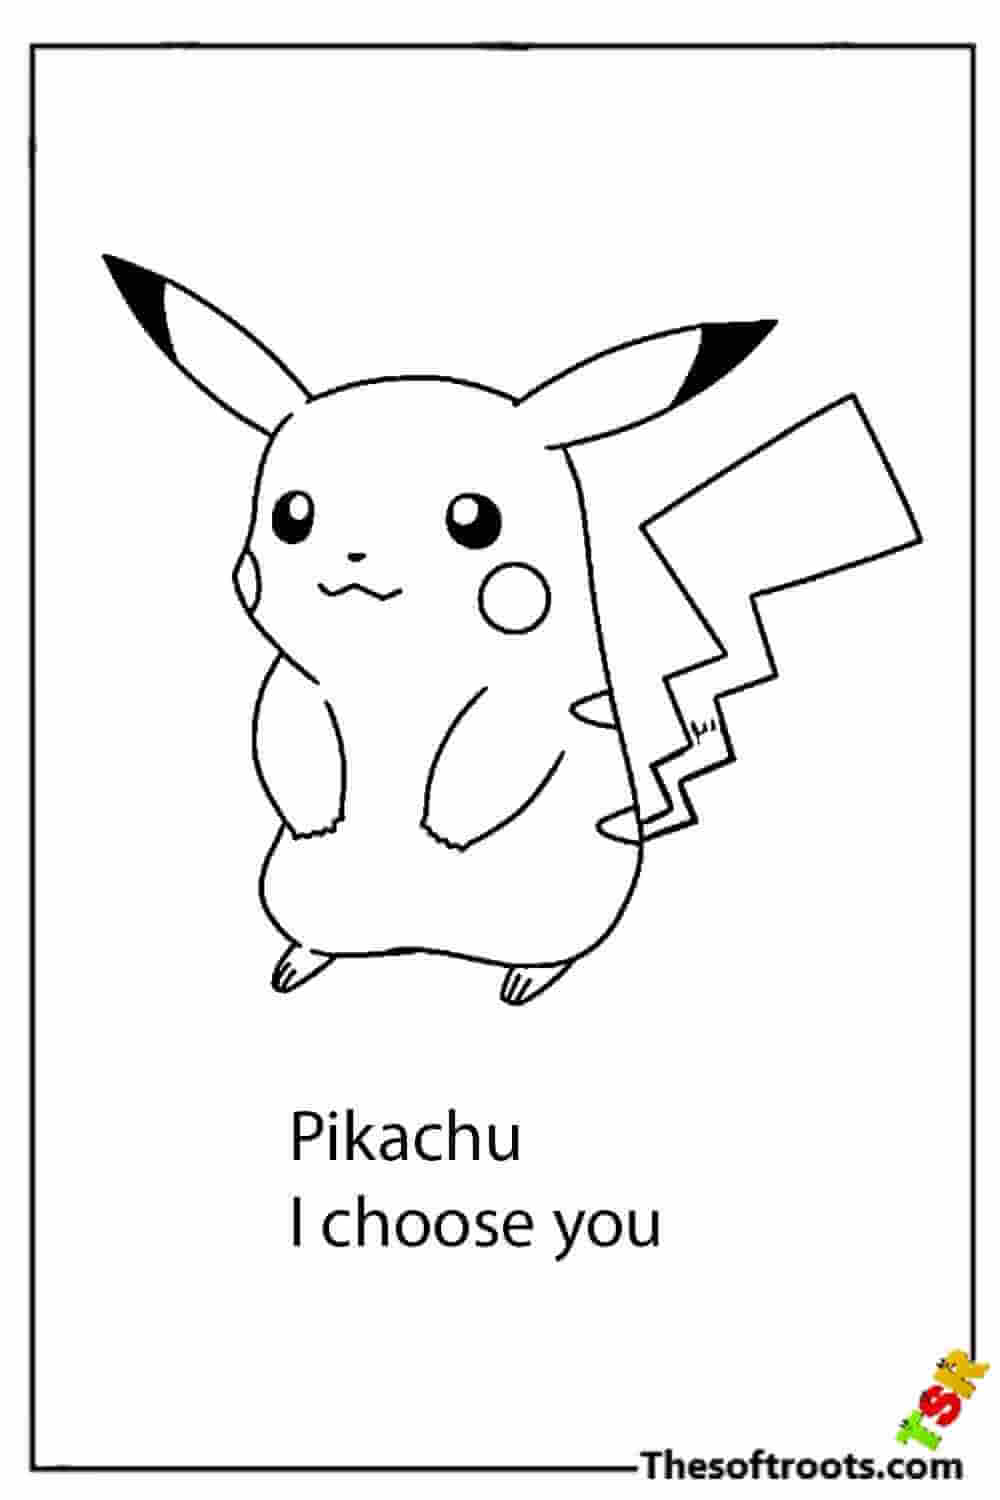 Pikachu, I choose you coloring pages